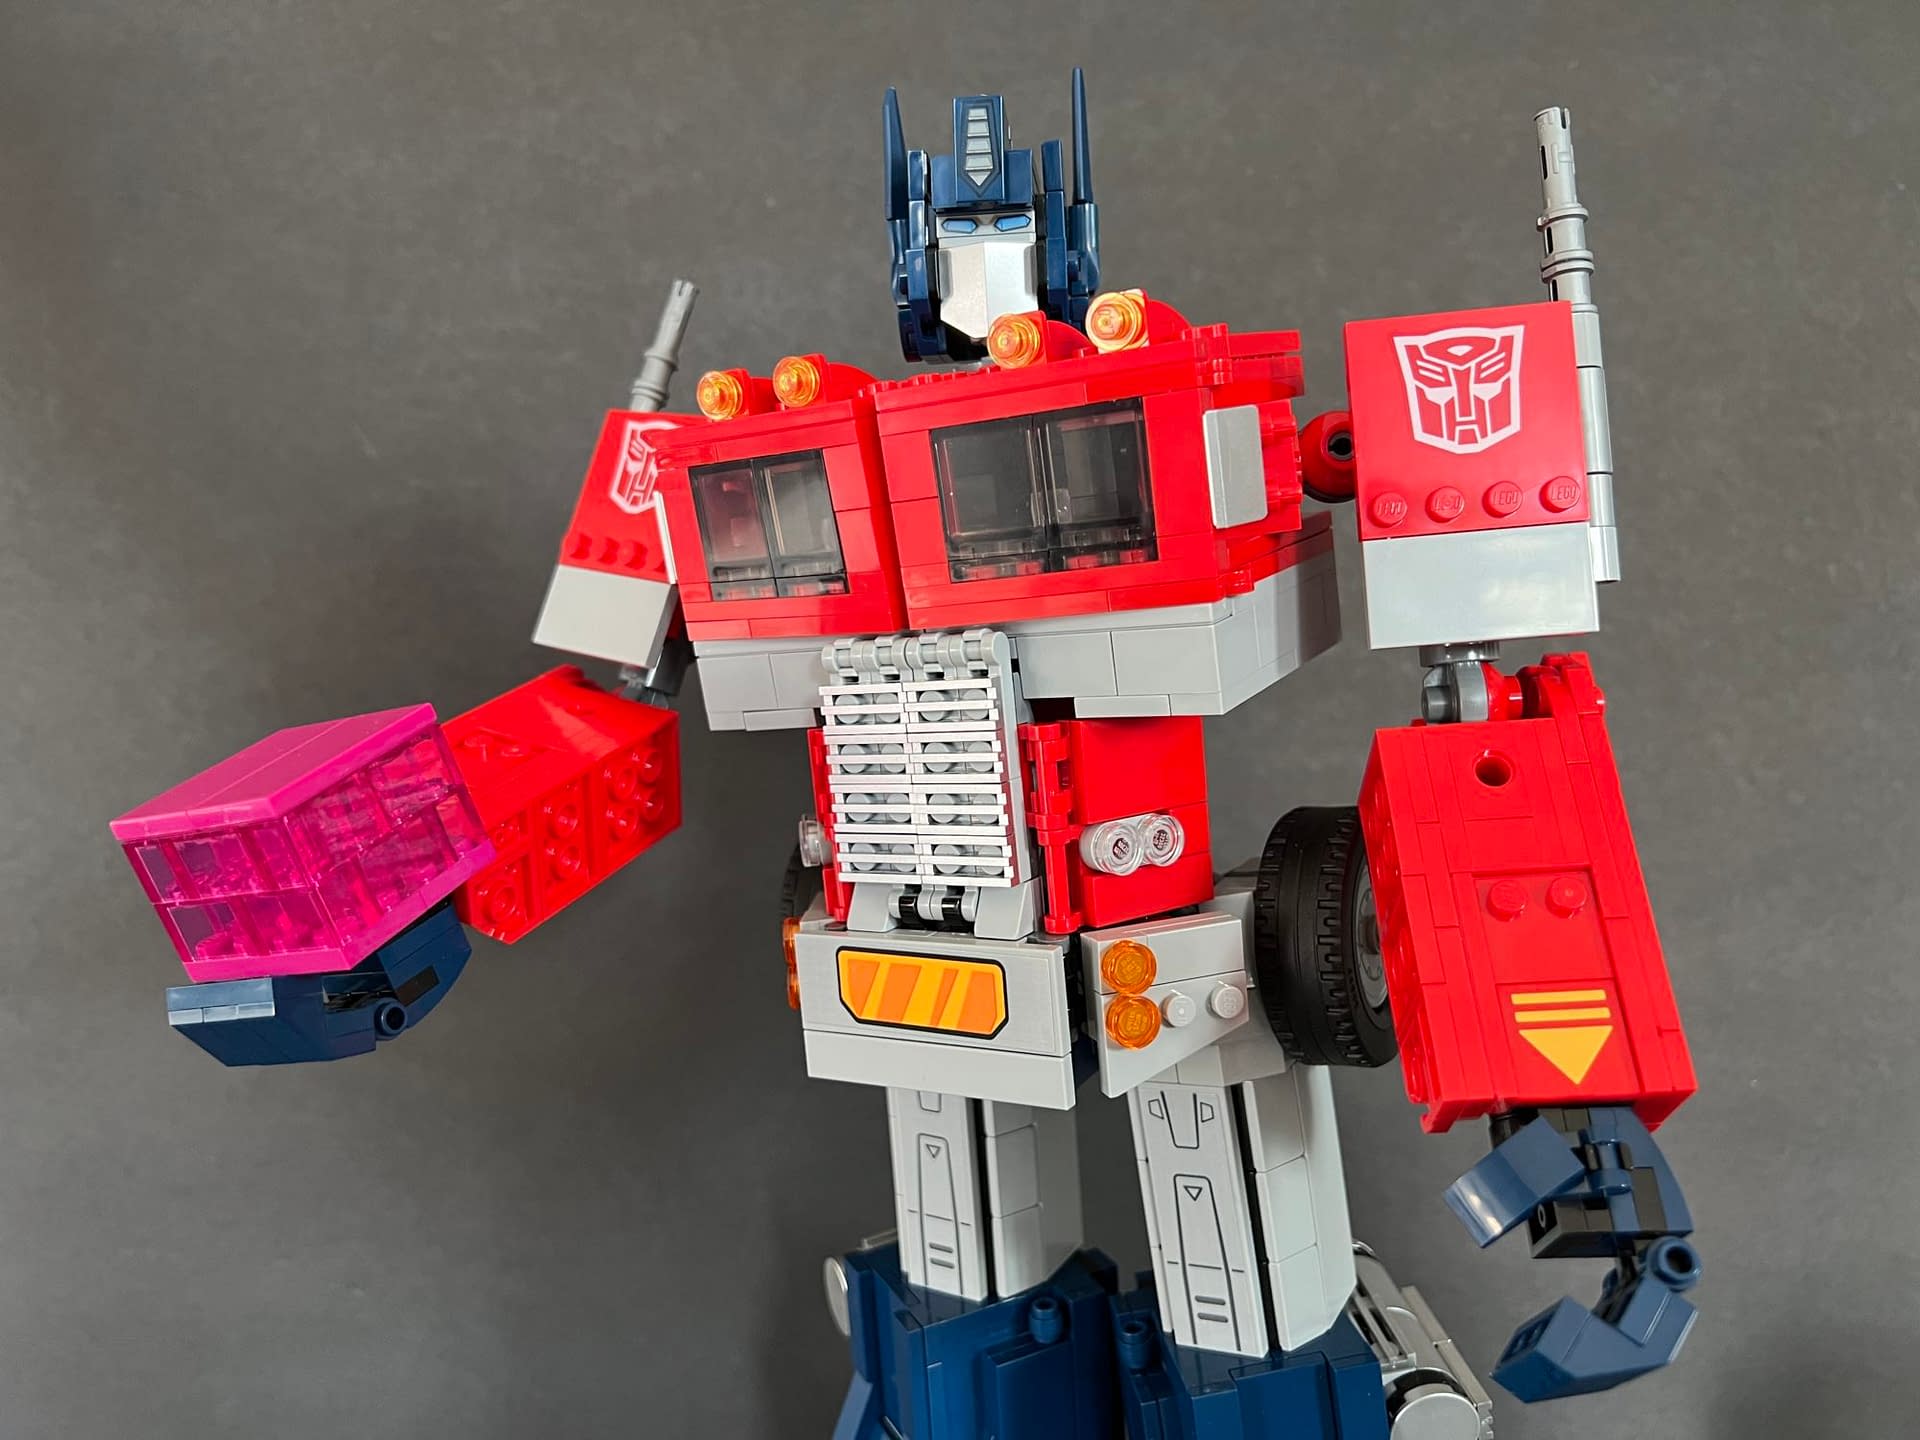 LEGO Transformers Optimus Prime: We Take An Early Look